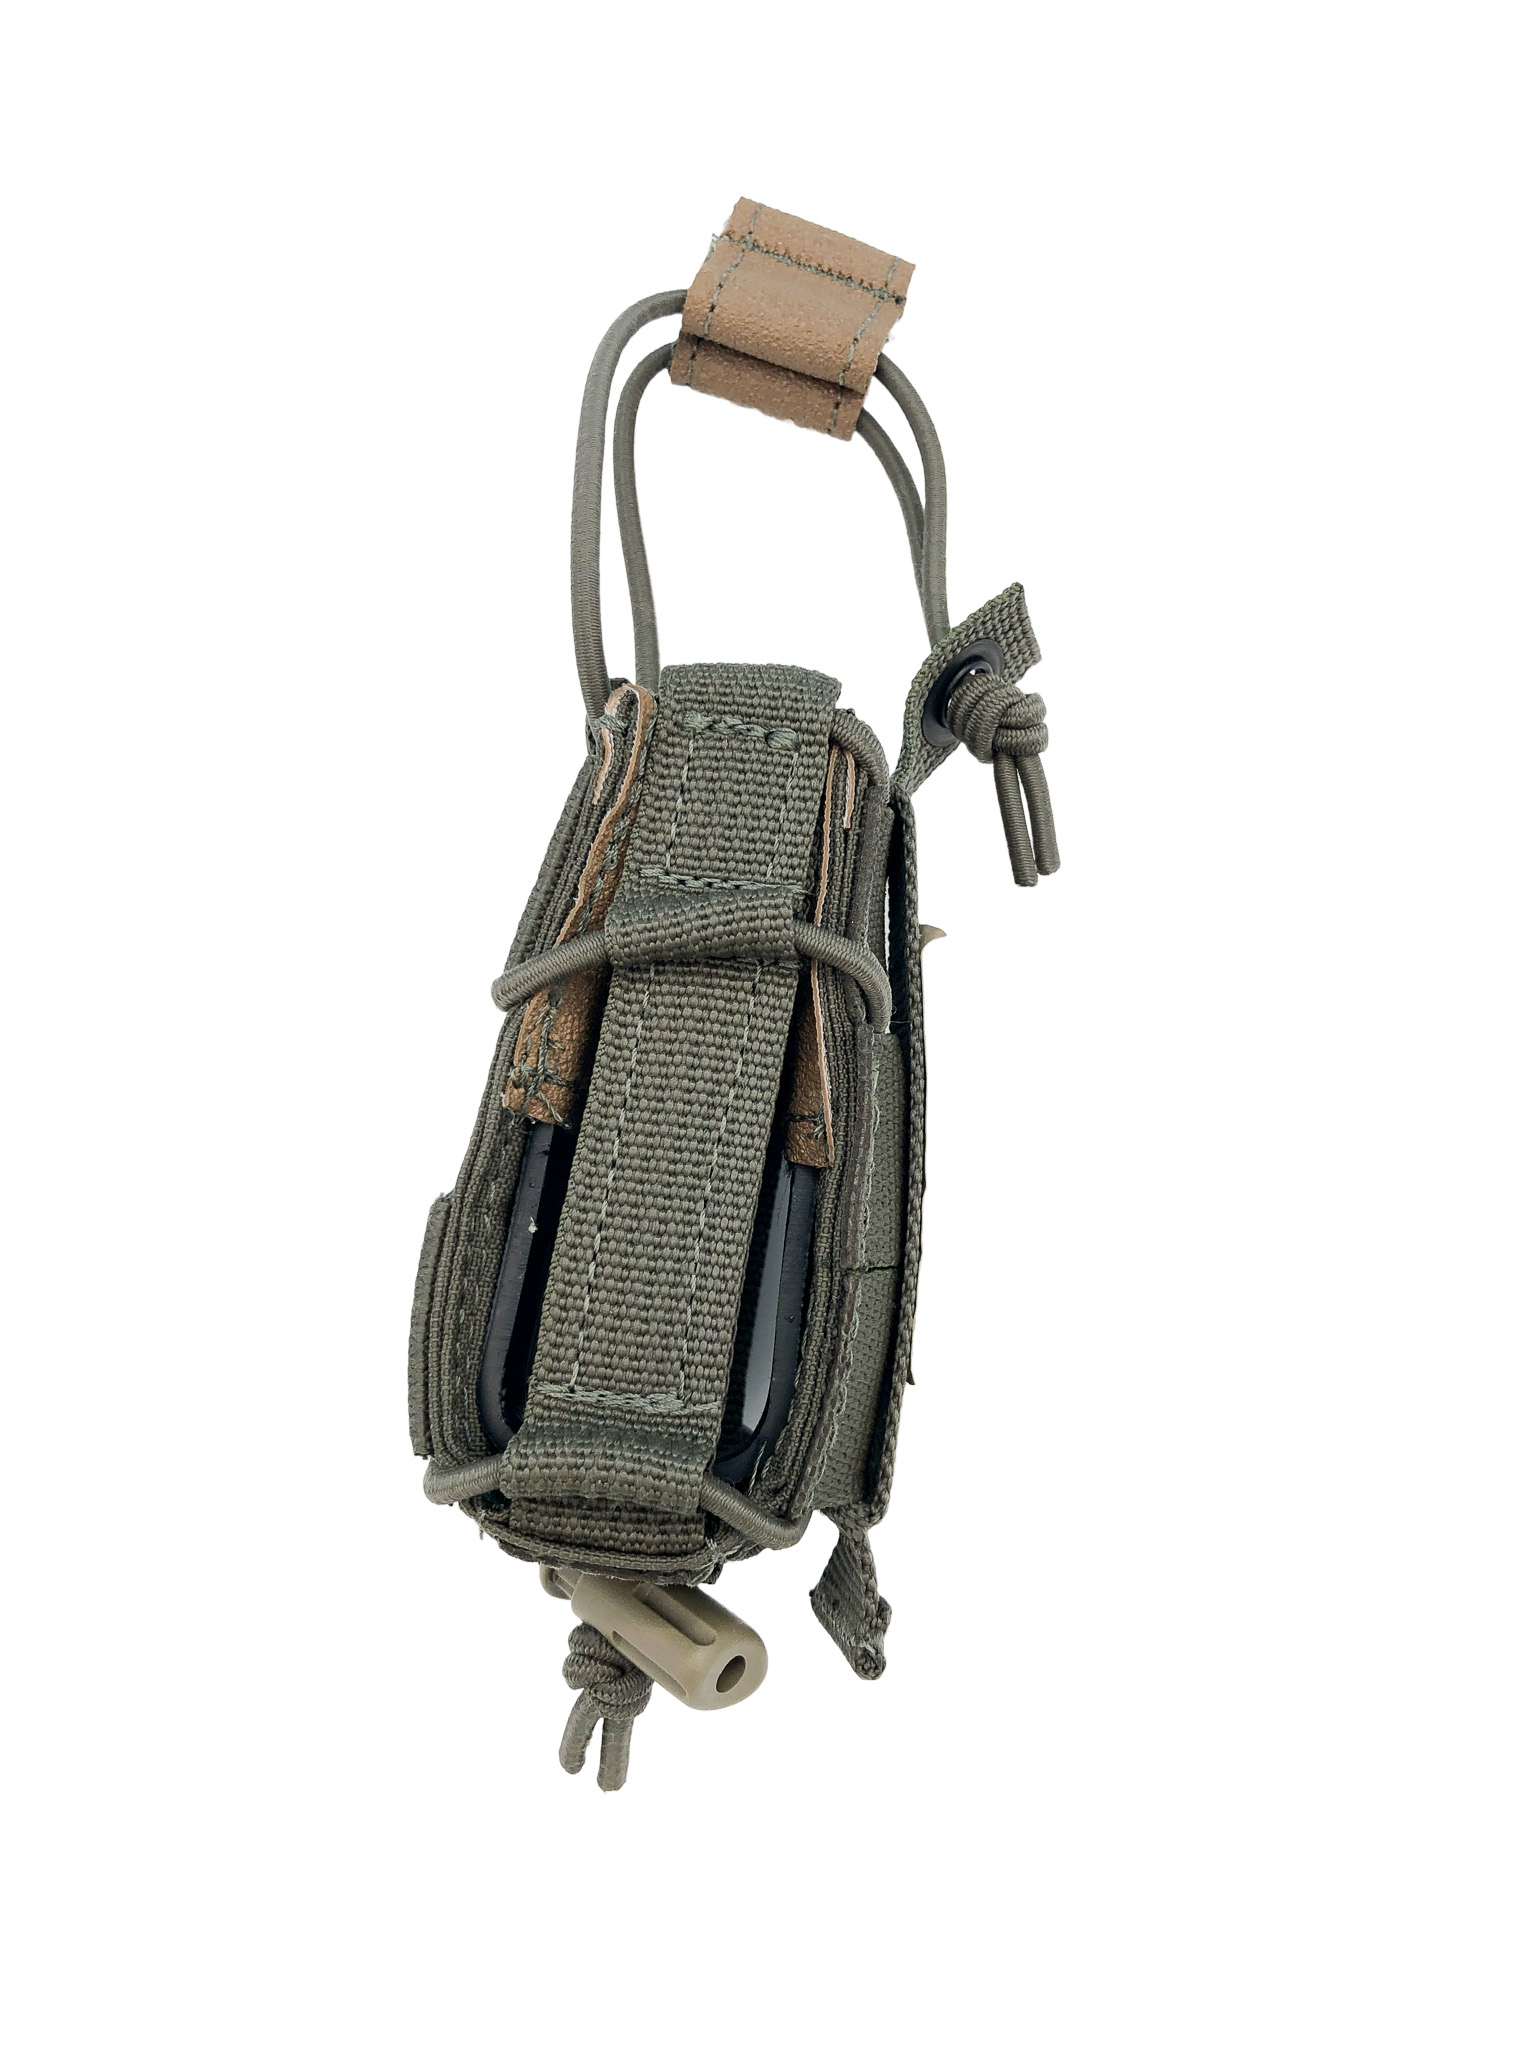 TYR Pistol Mag Pouch – Combat Adjustable Happy Mag | REALMENT